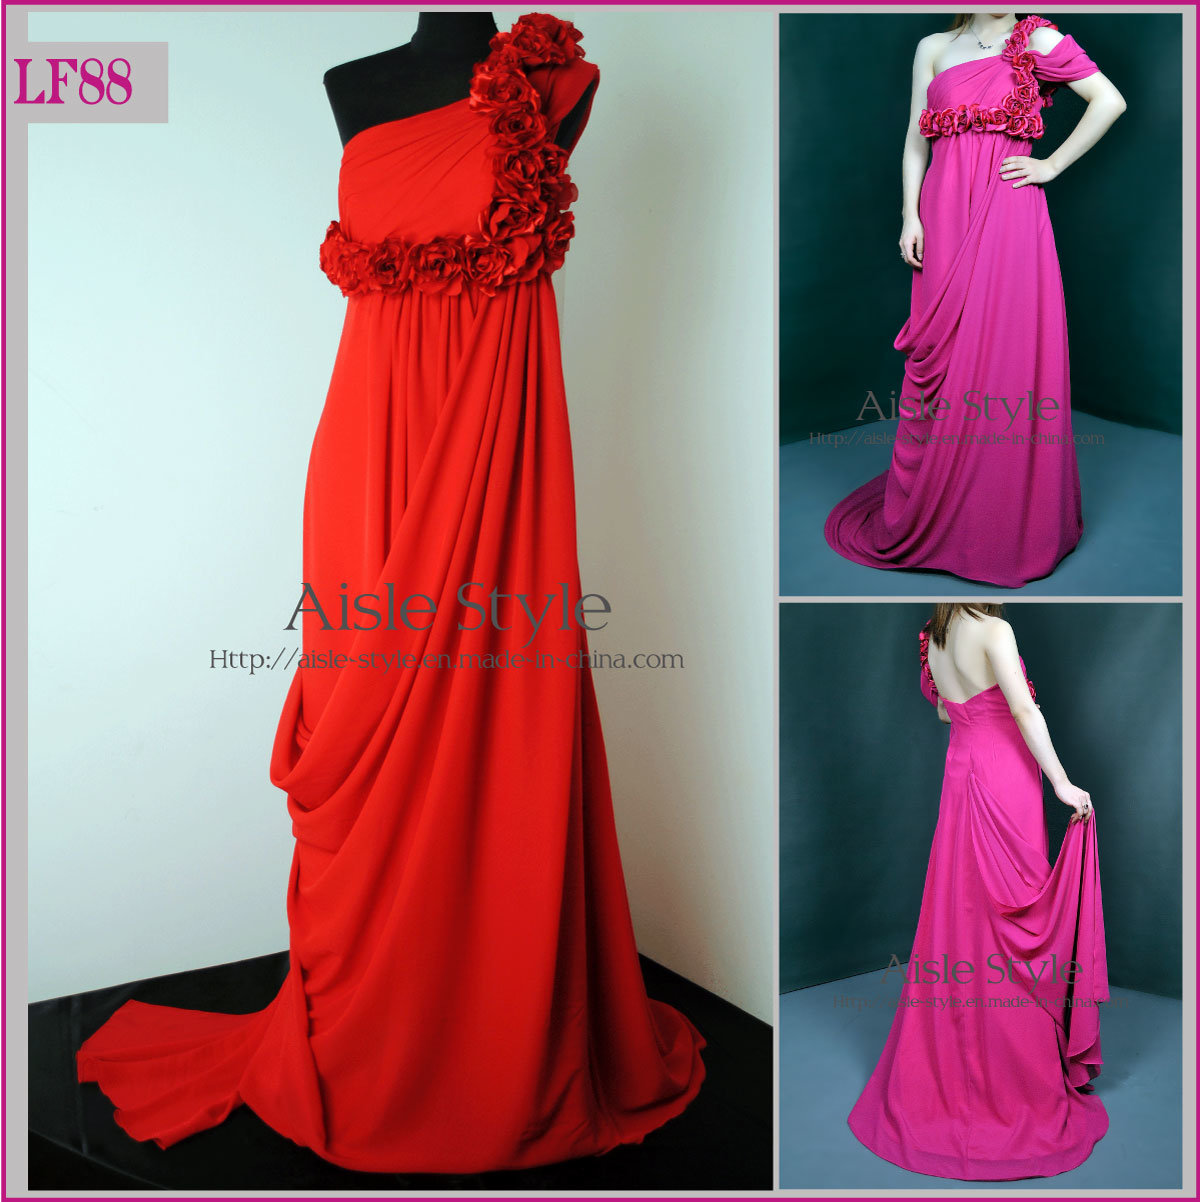 Flowery Evening Gown With Single Shoulder (LF88)